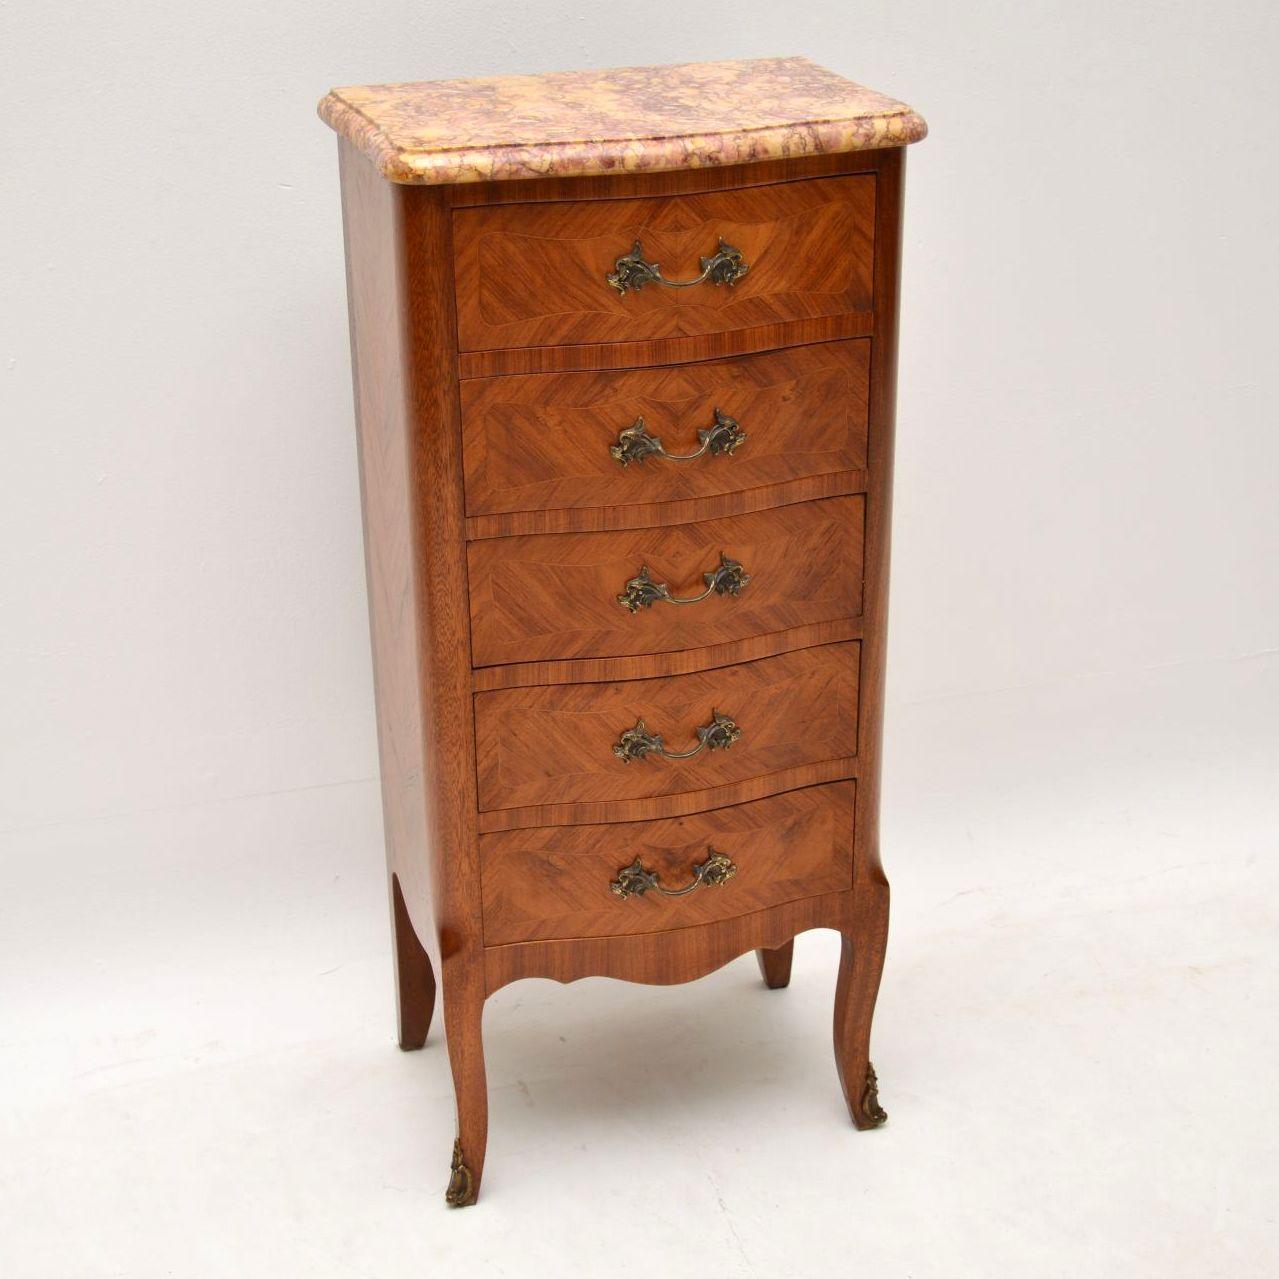 Antique French Marble-Top Chest of Drawers (Französisch)